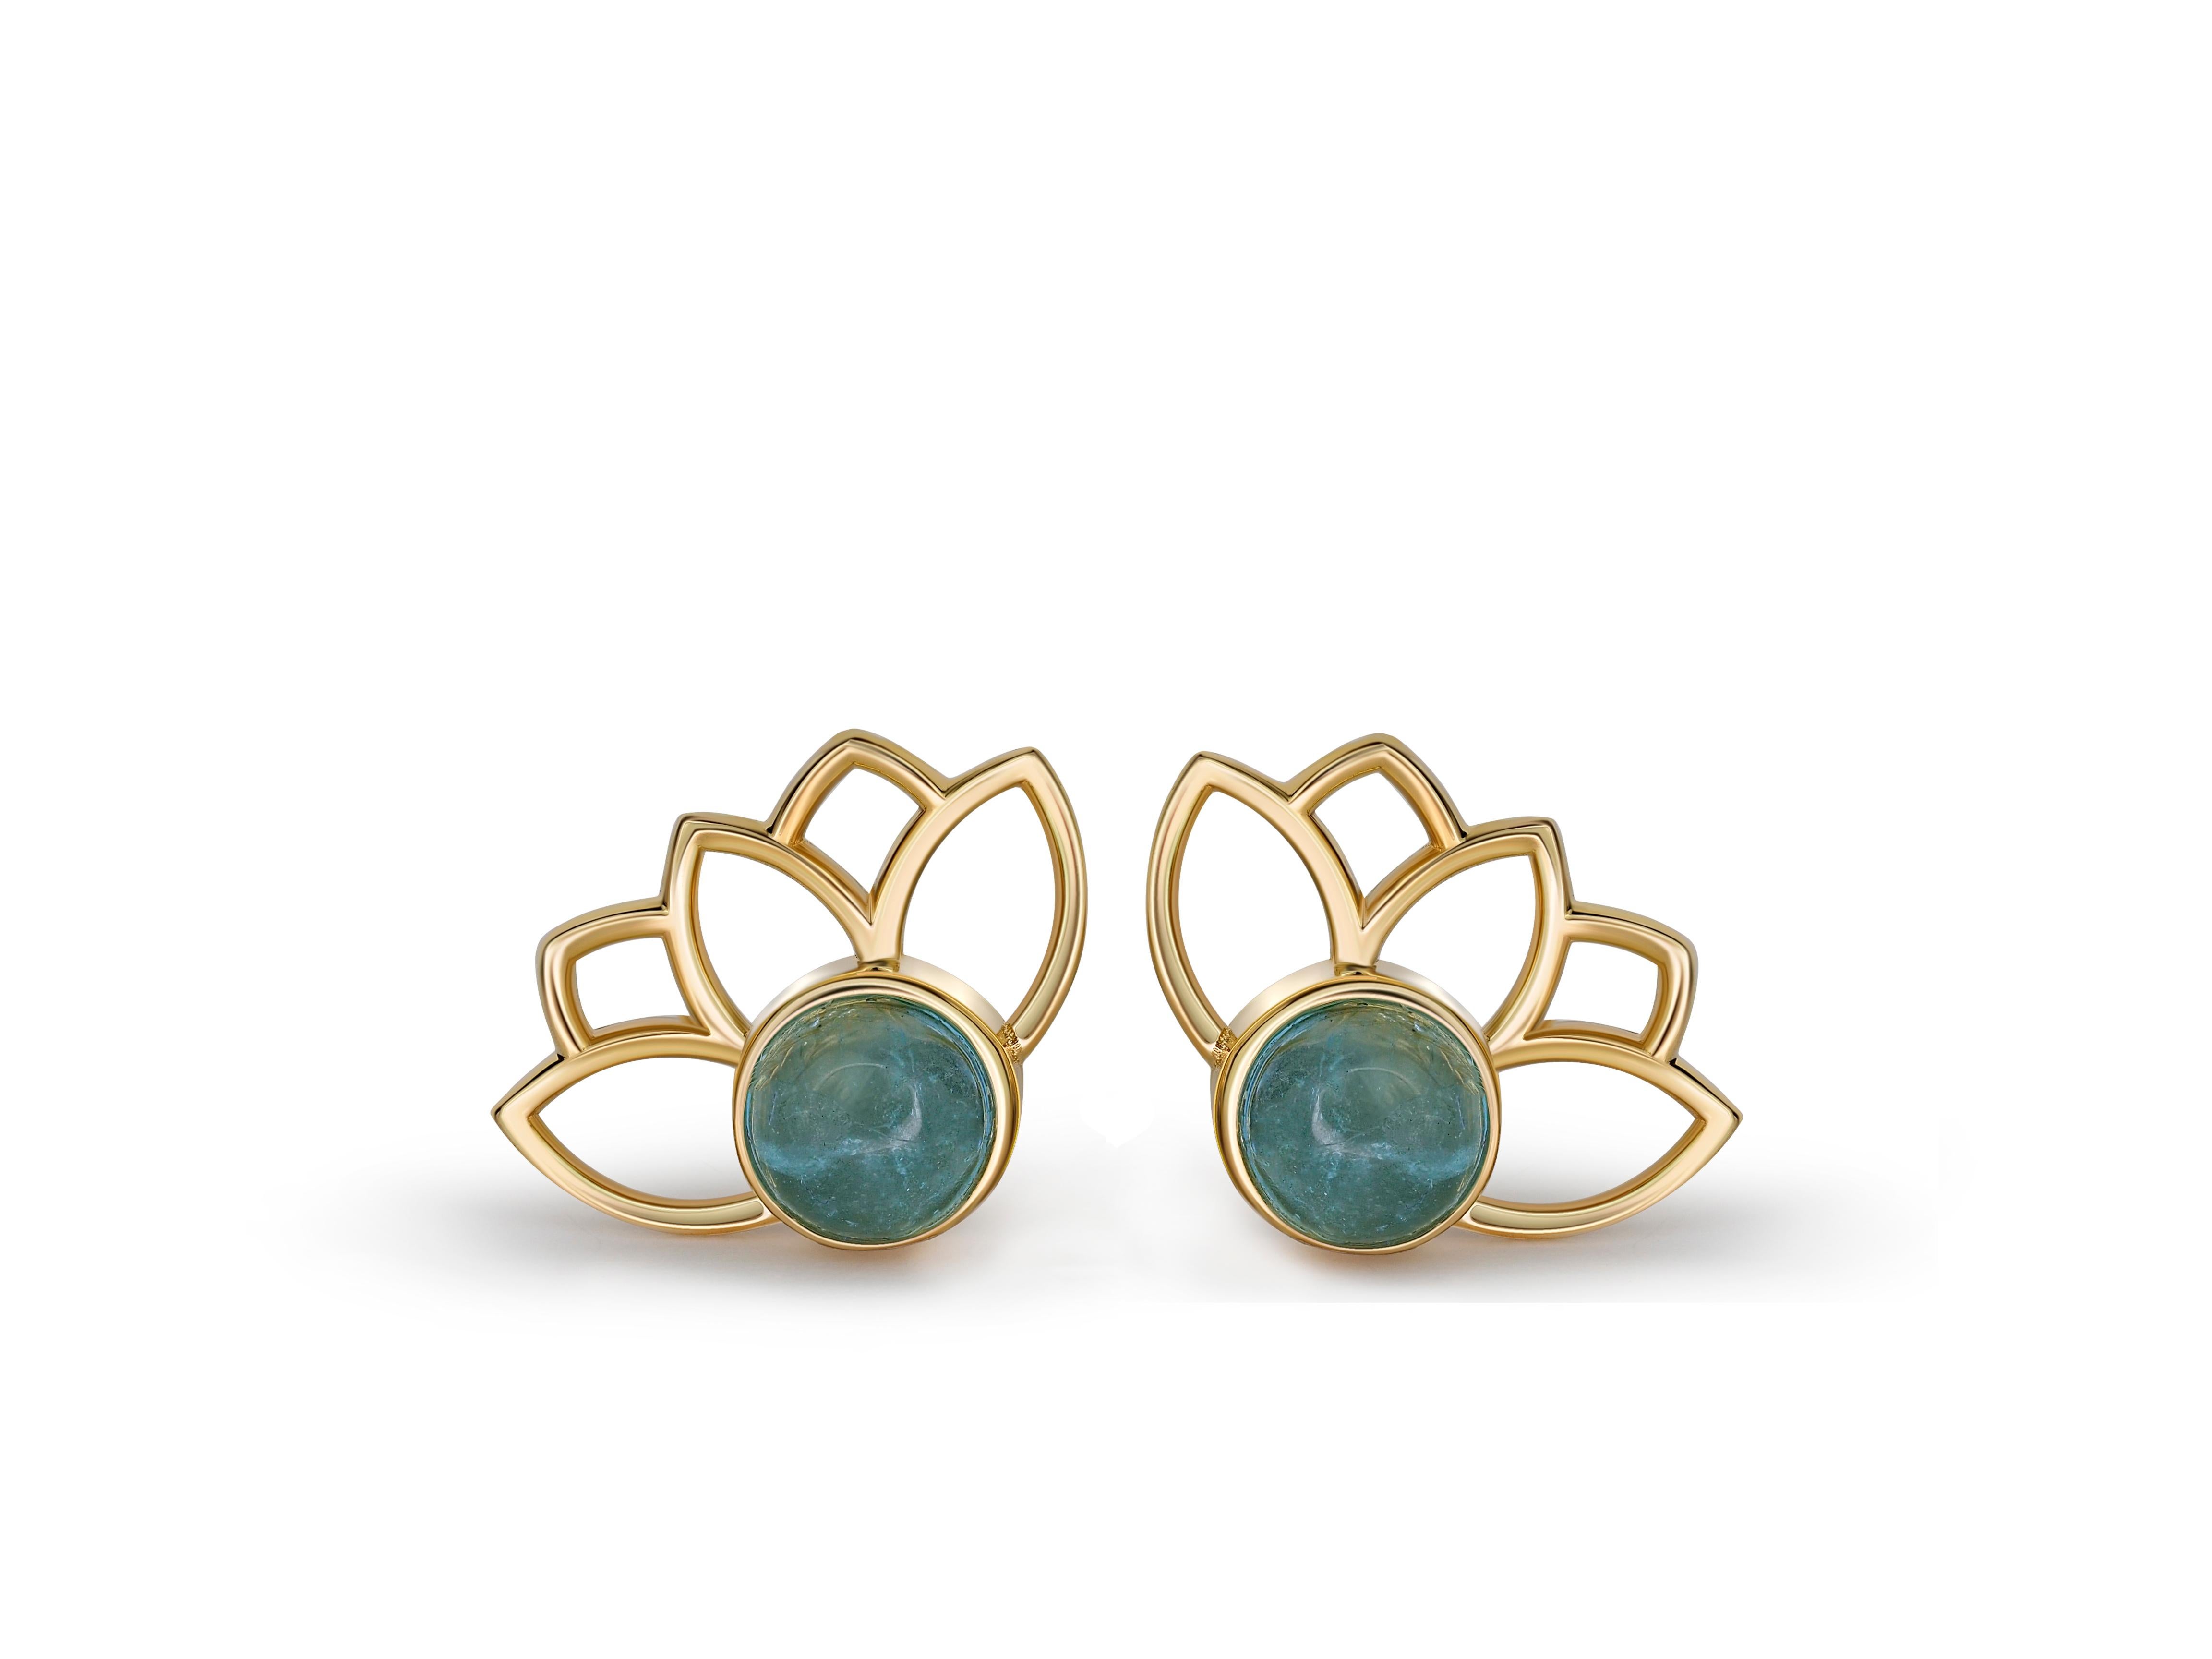 Cabochon Lotus Earrings Studs with Aquamarines in 14k Gold, Aquamarine Cab Earrings For Sale